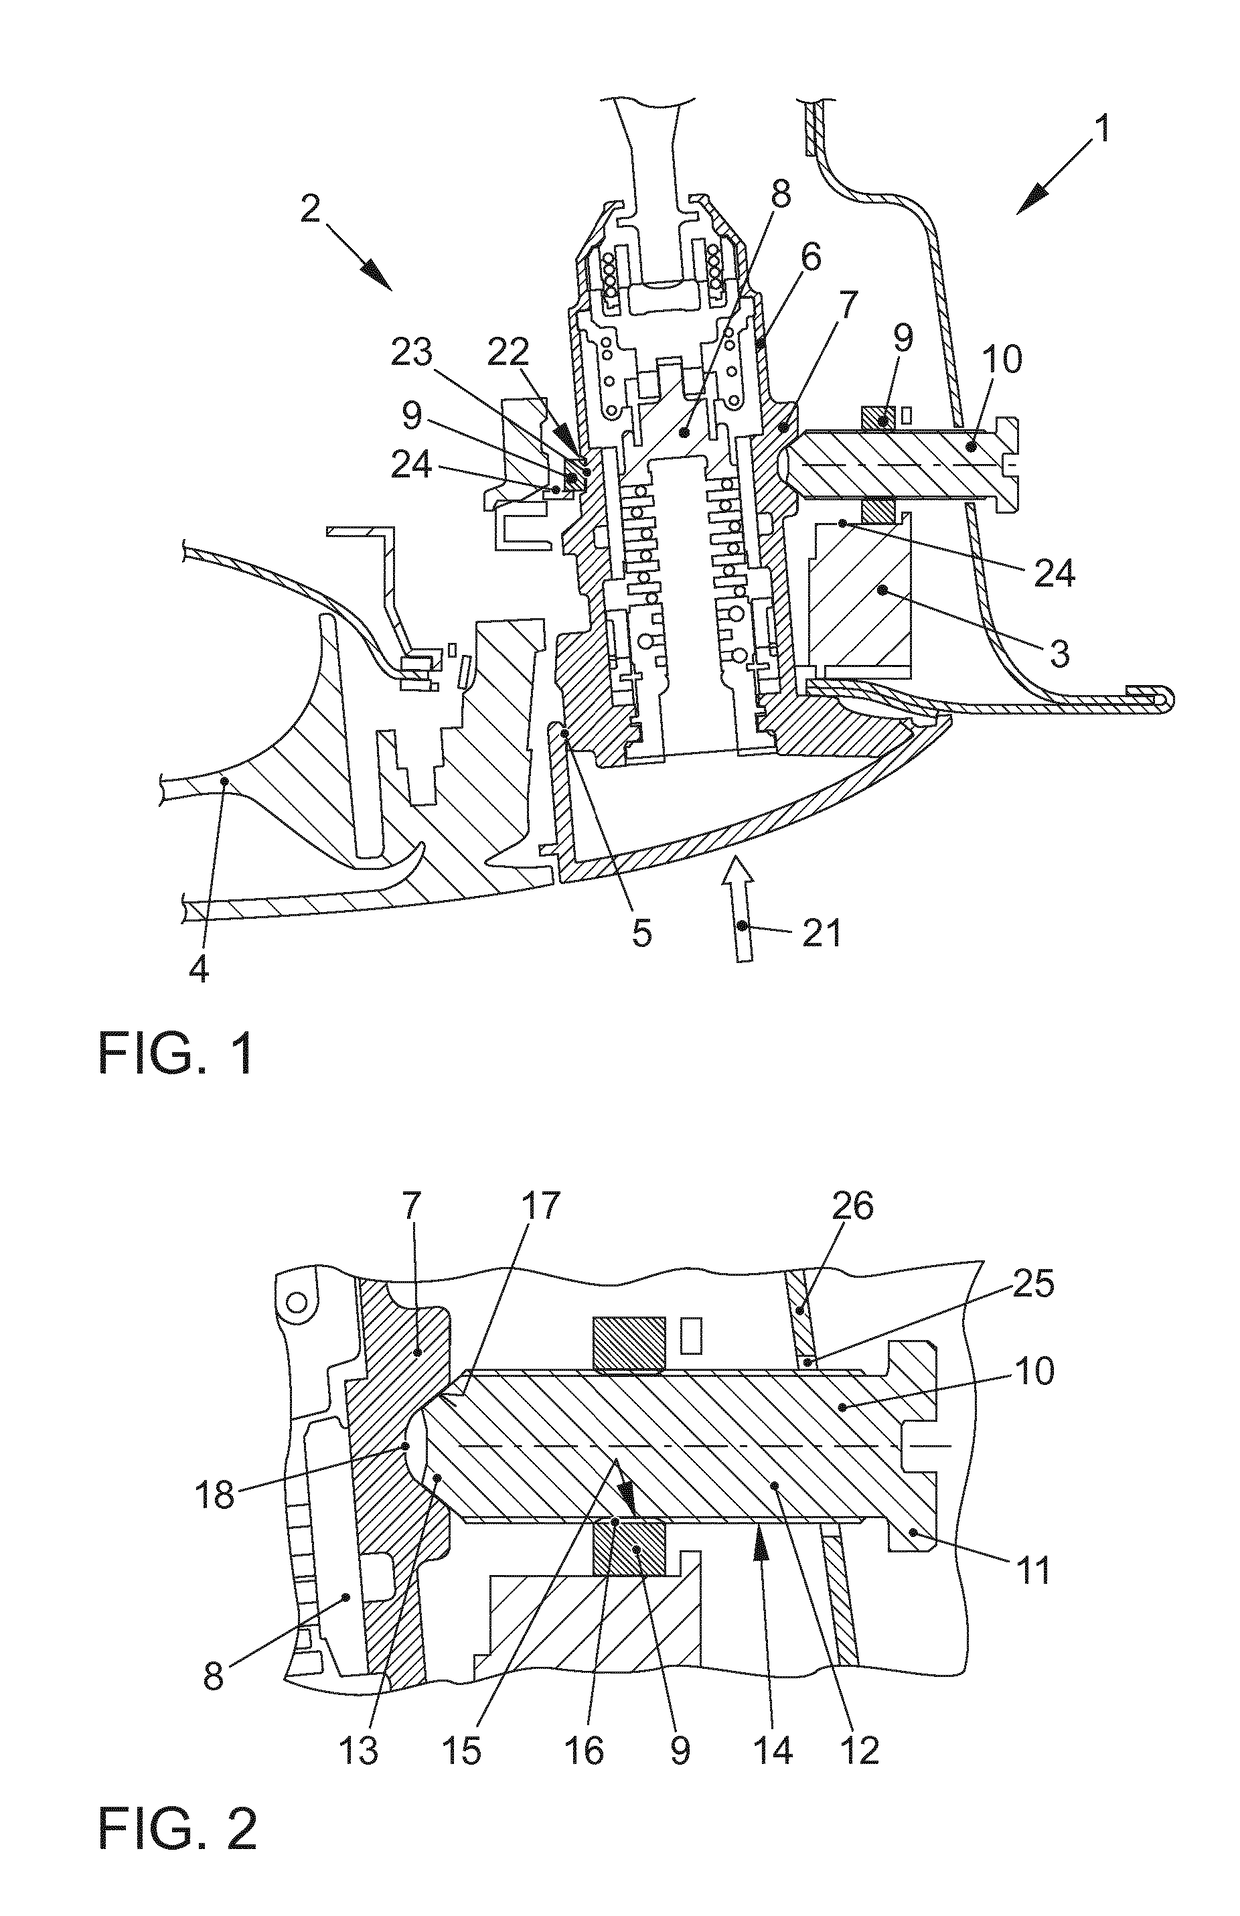 Locking device for a door or flap